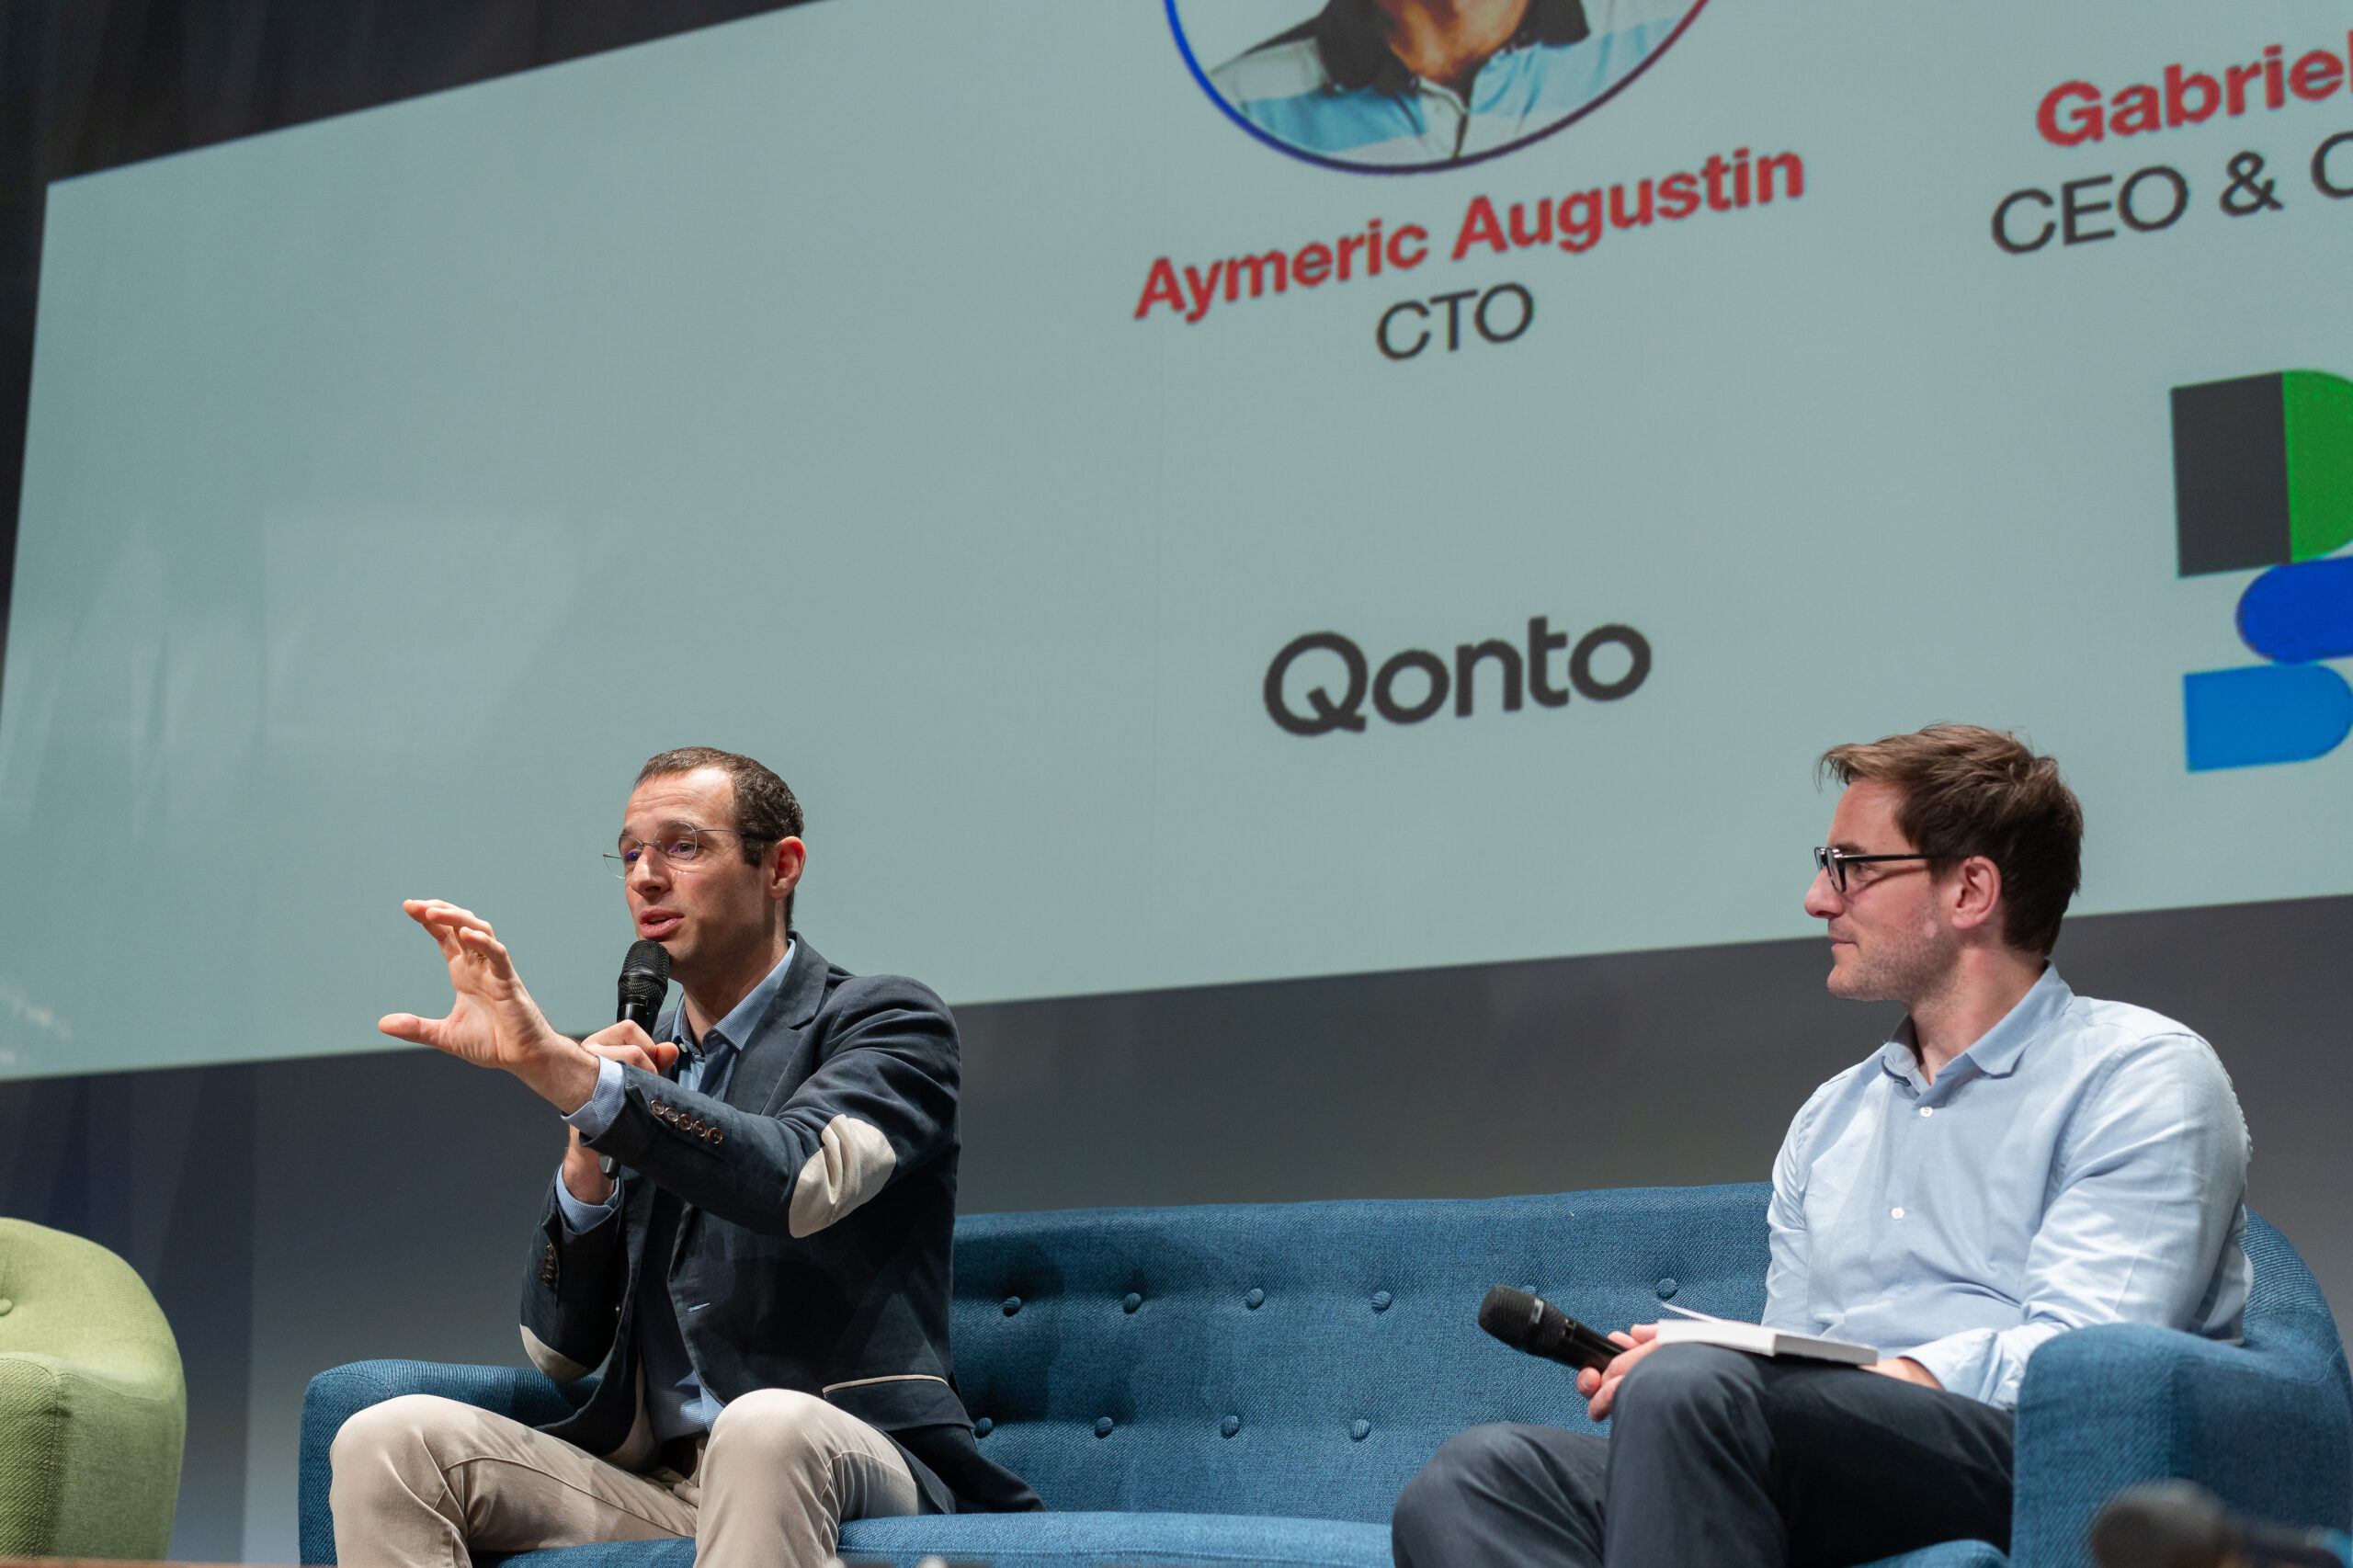 Aymeric Augustin, CTO at Qonto, and Gabriel Hubert, CEO & Co-founder of Dust – Gen AI adoption at fast-growing companies